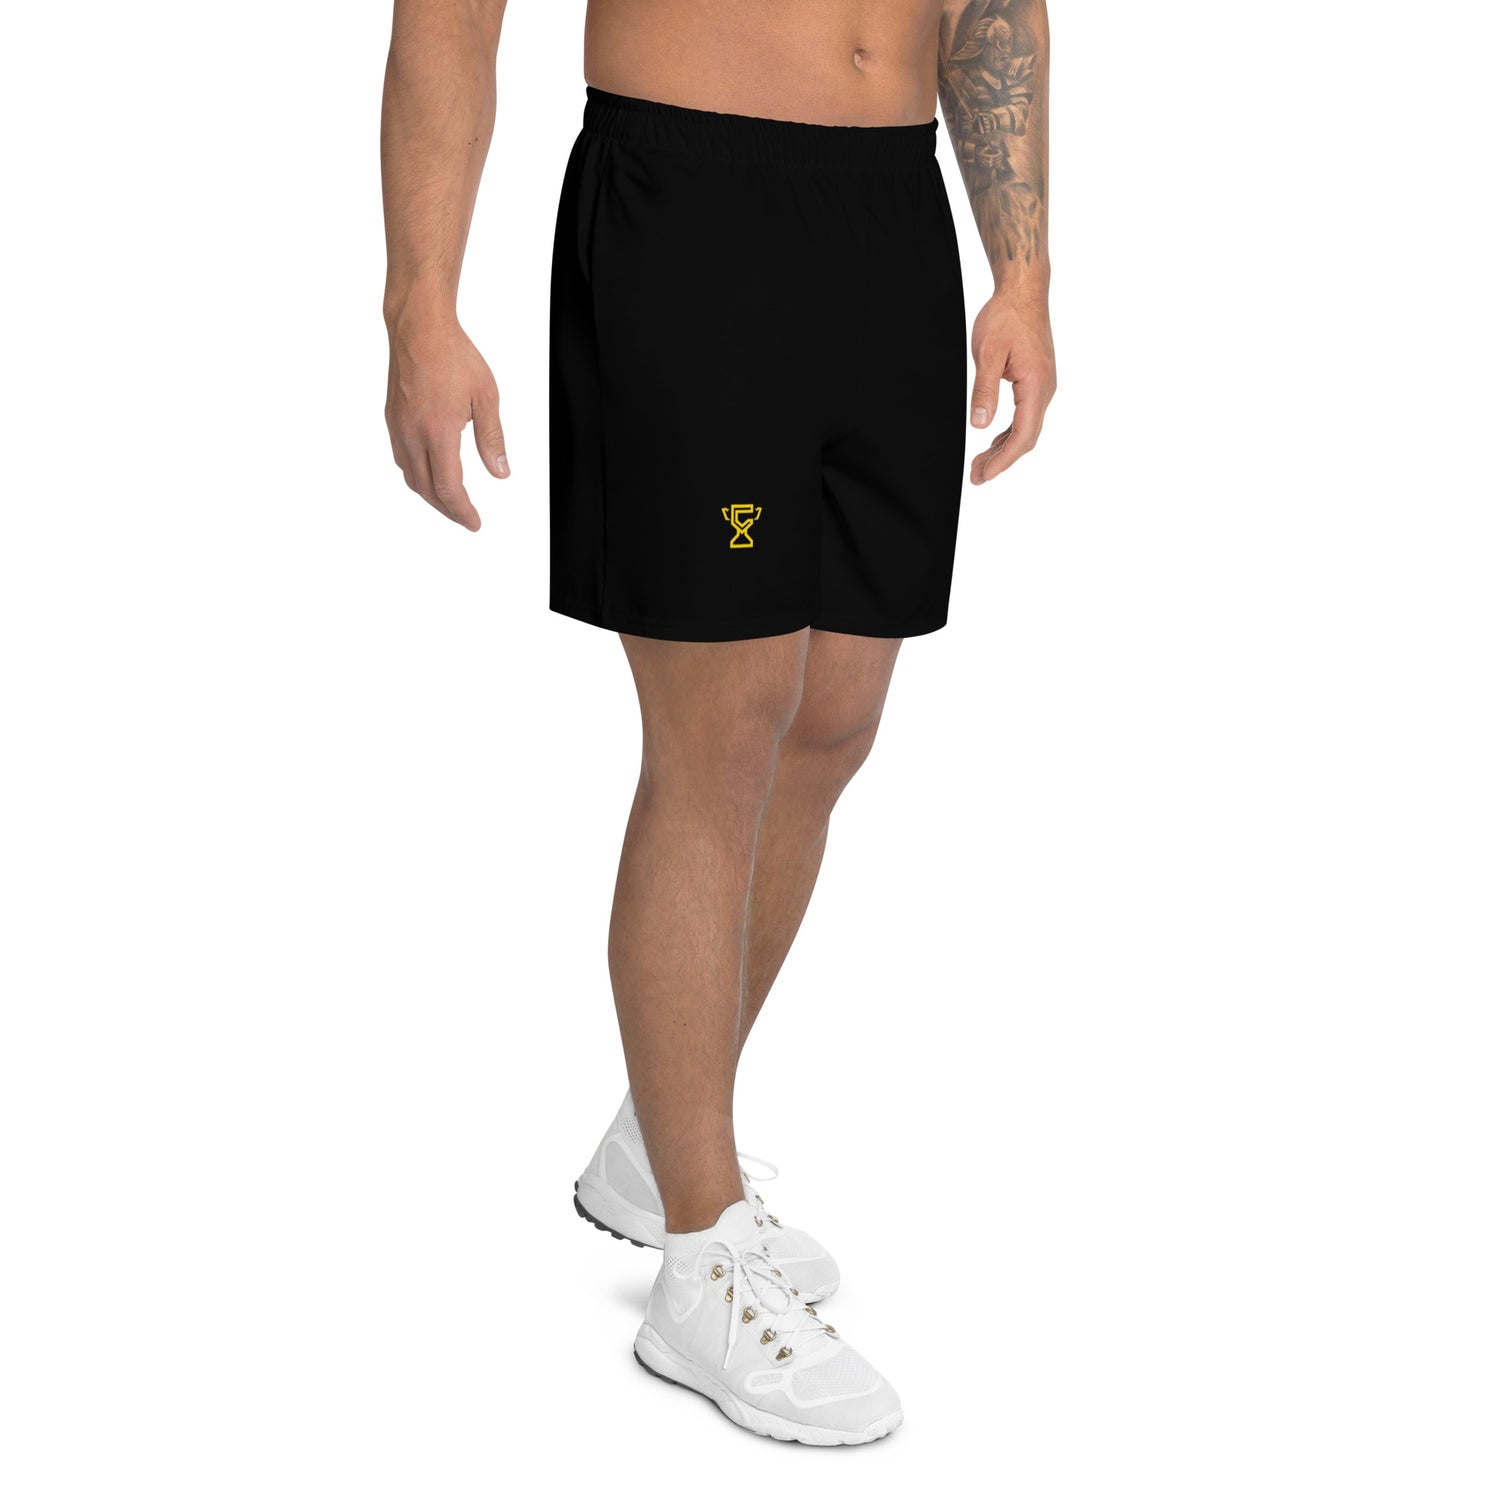 Left facing view of the black Champletes Light Speed shorts.